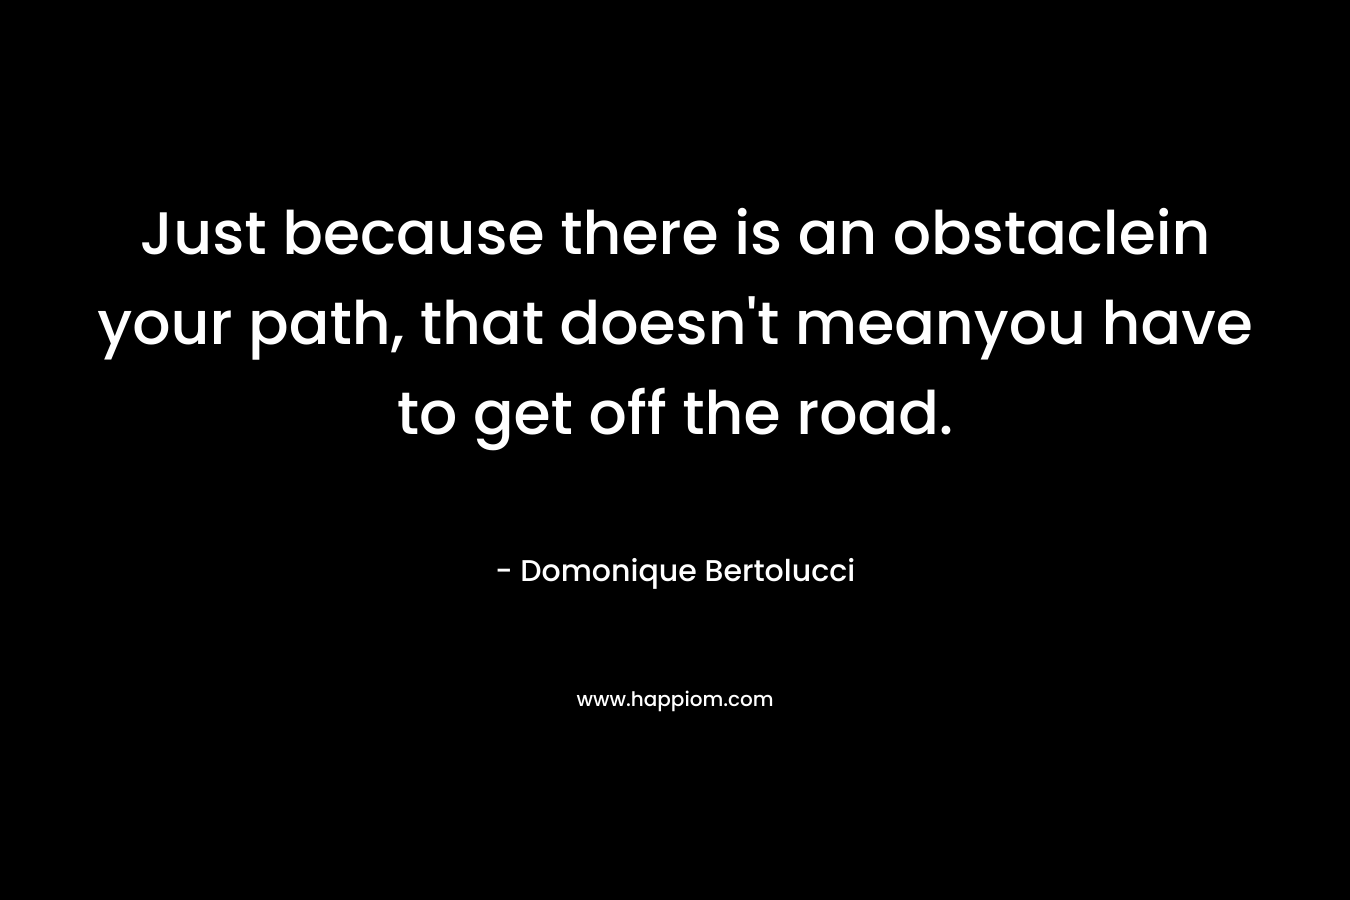 Just because there is an obstaclein your path, that doesn't meanyou have to get off the road.